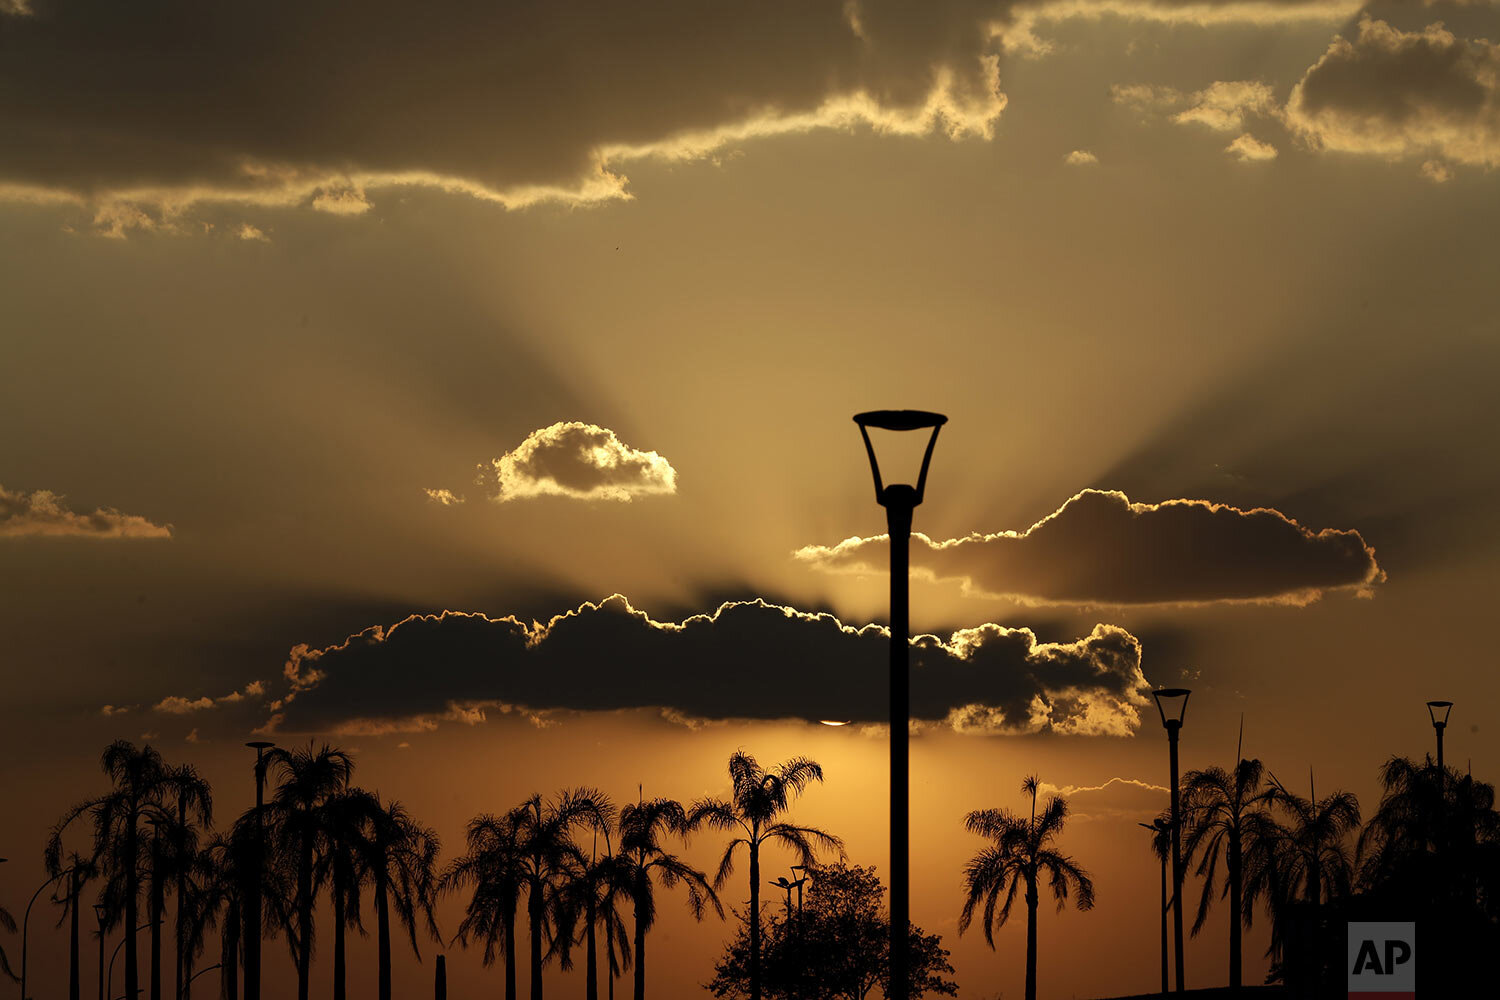  Palm trees in City Park are silhouetted at dusk after temperatures peaked at 40 degrees Celsius, or 100.4 degrees Fahrenheit, in Brasilia, Brazil, Oct. 6, 2020. (AP Photo/Eraldo Peres) 